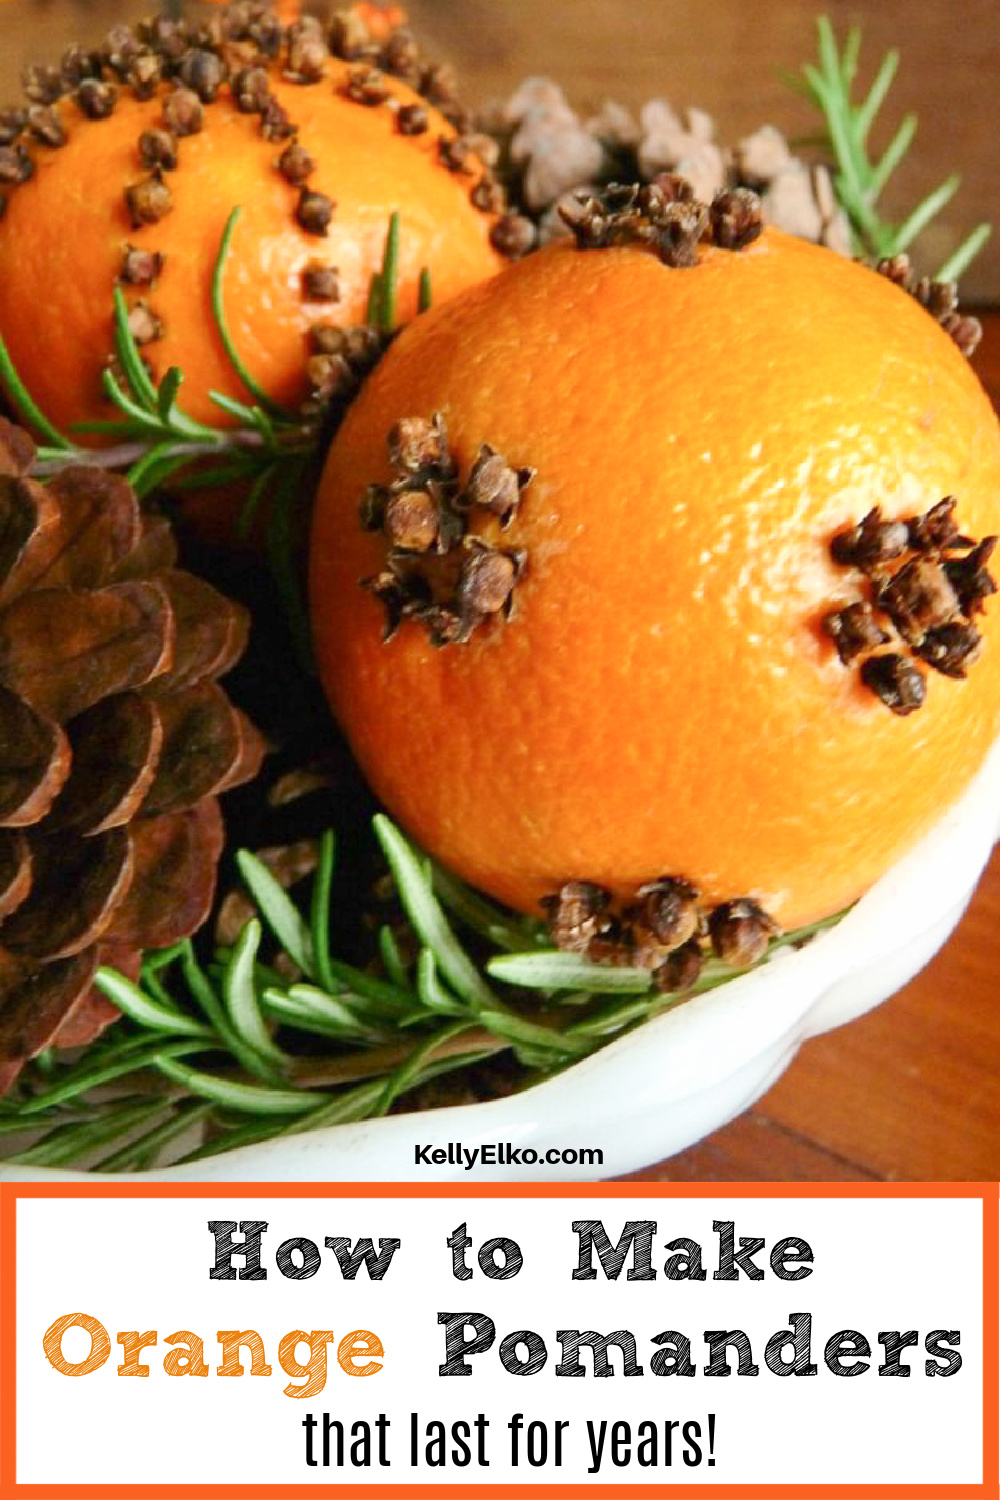 How to make pomanders that last for years! kellyelko.com